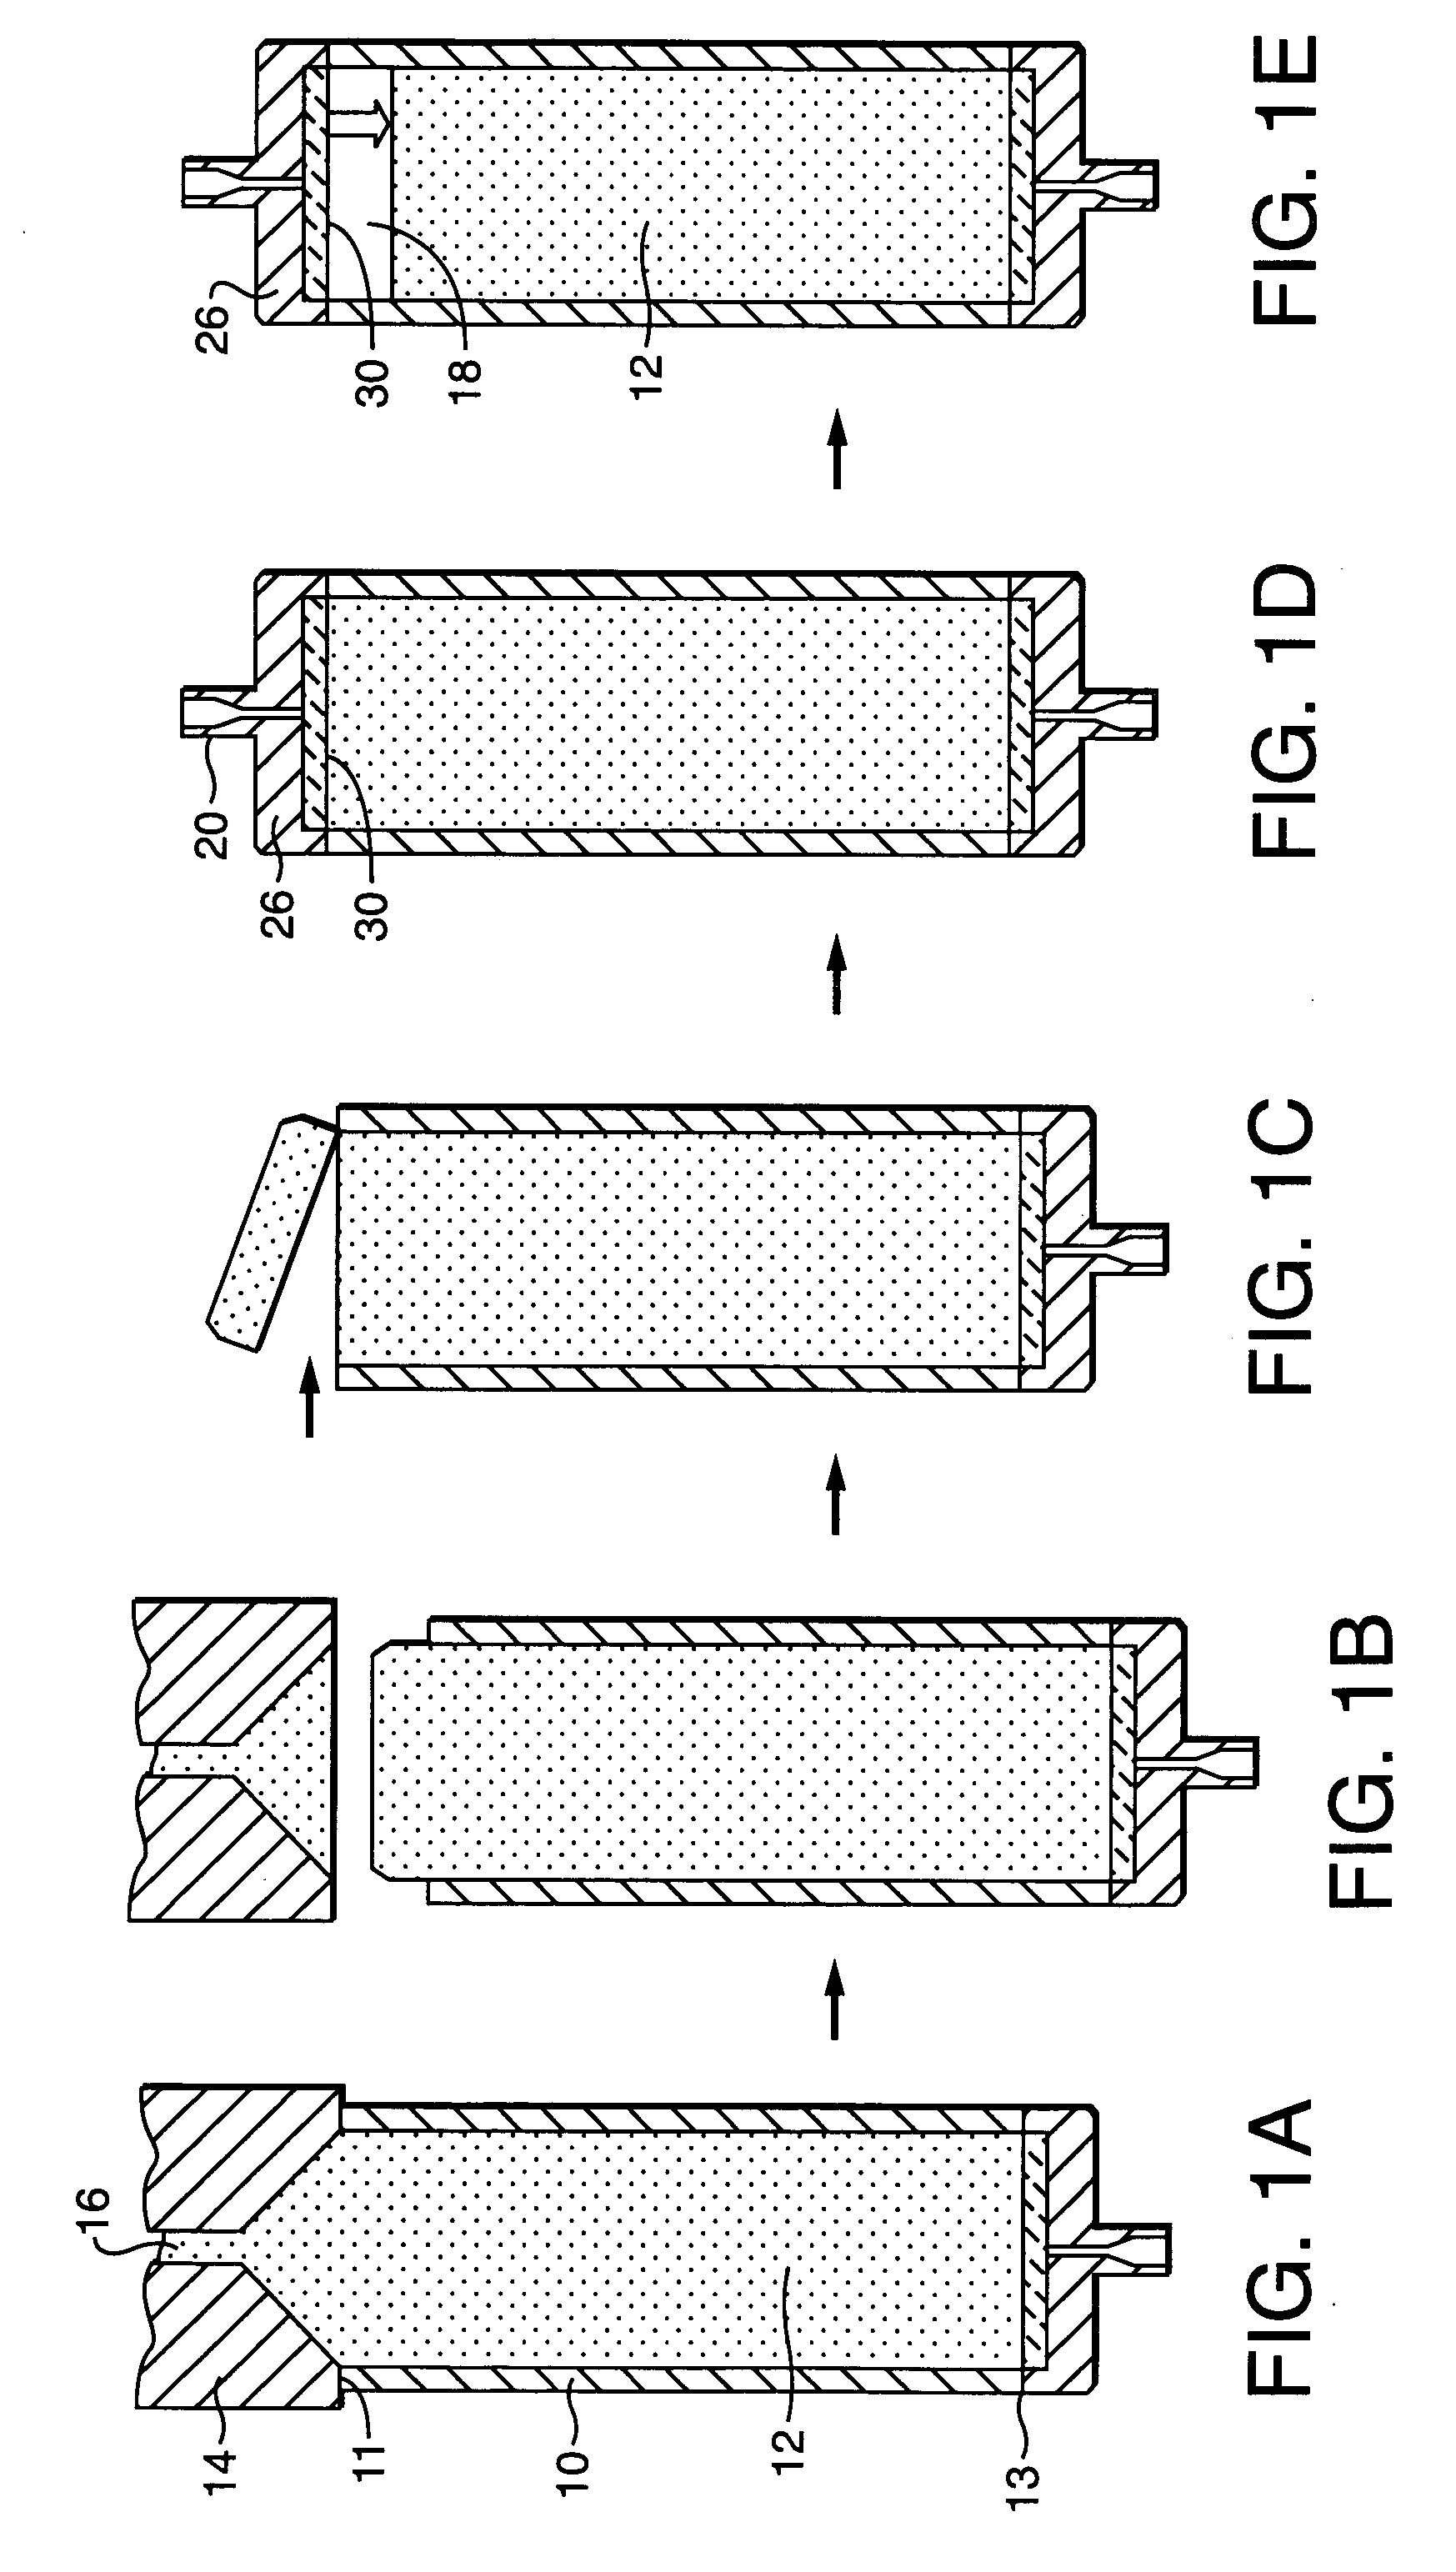 Chromatographic column and methods for controlling sorbent density